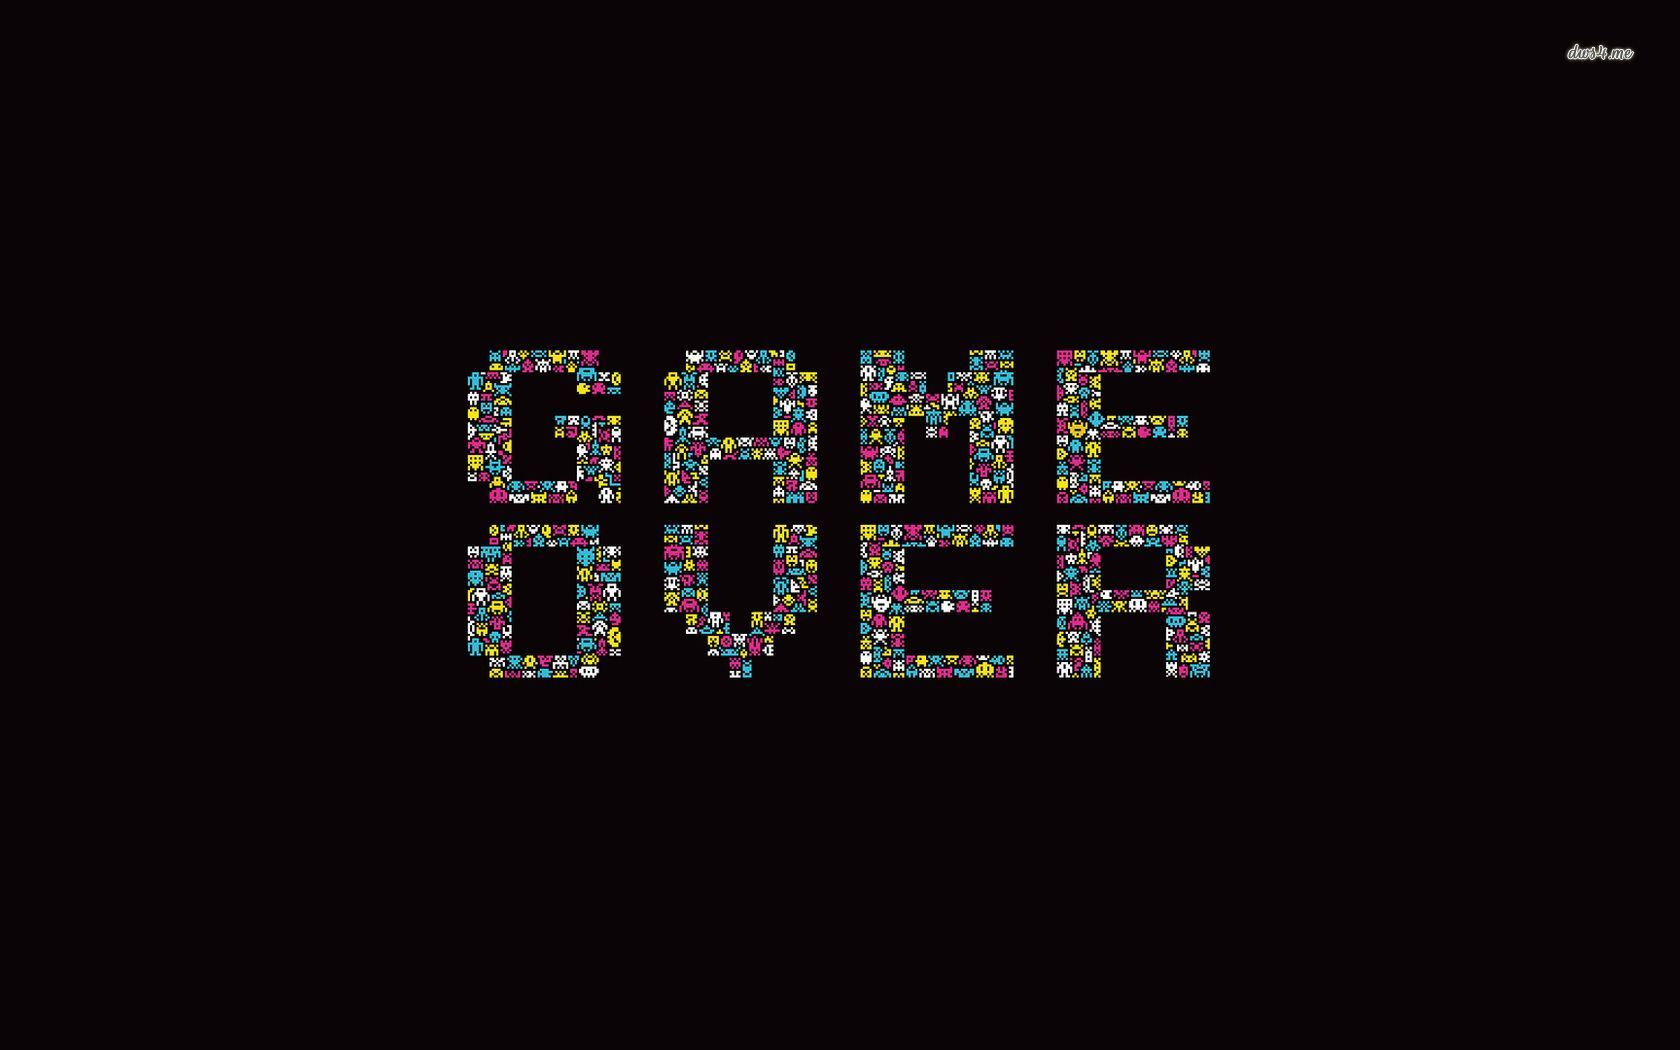 Game Over Pac-Man wallpaper - Game wallpapers - #46242